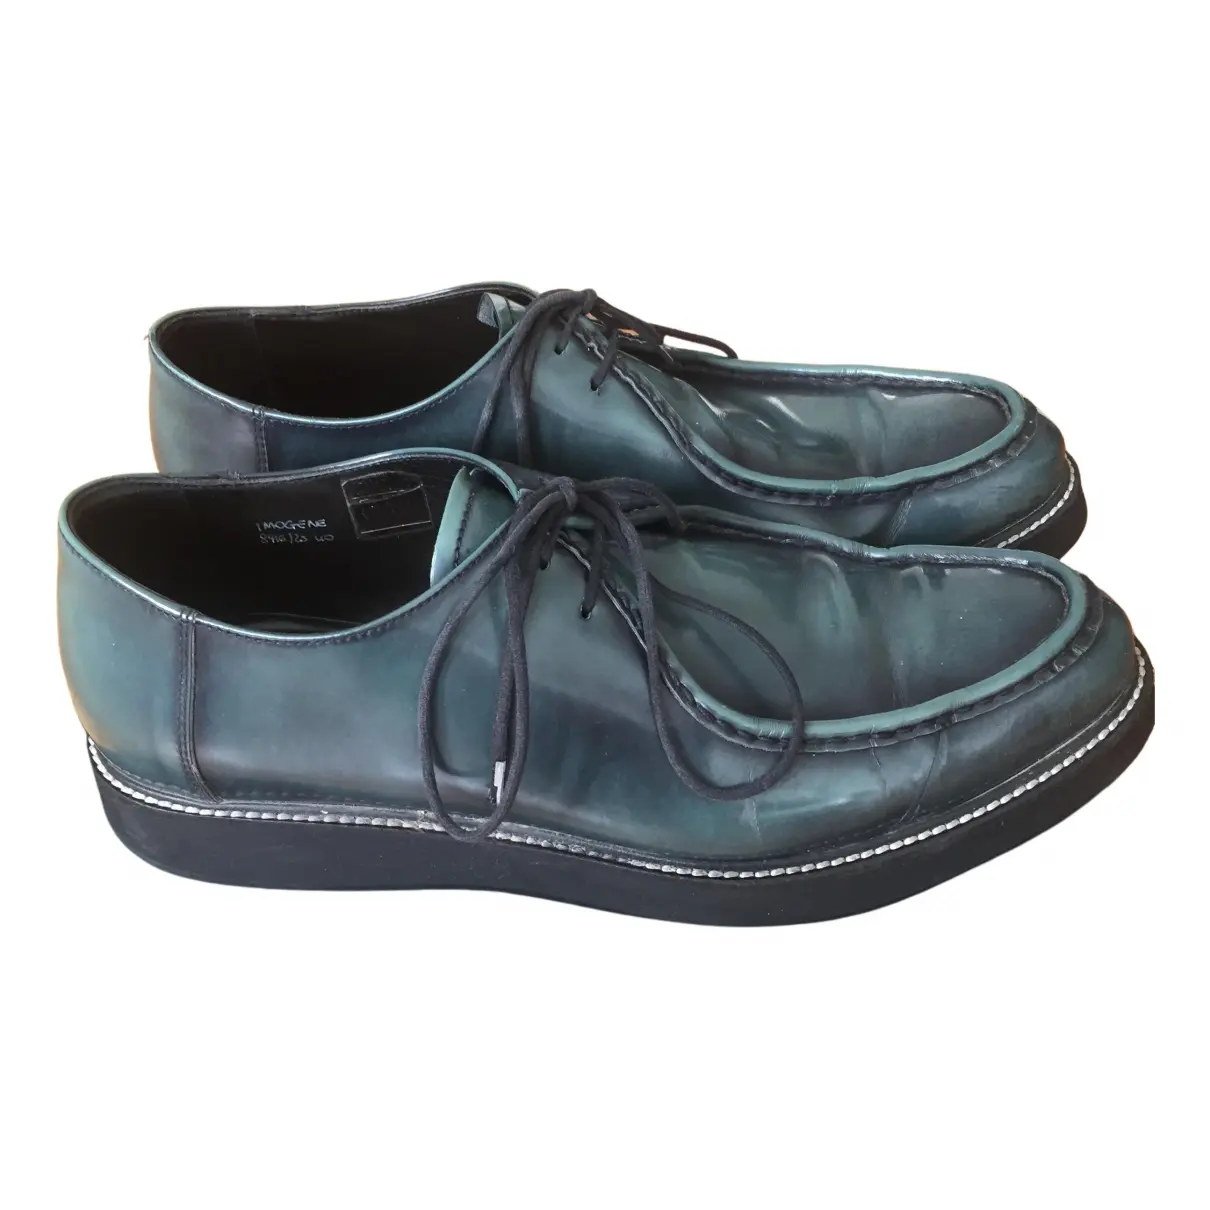 Patent leather lace ups Church's - Vintage